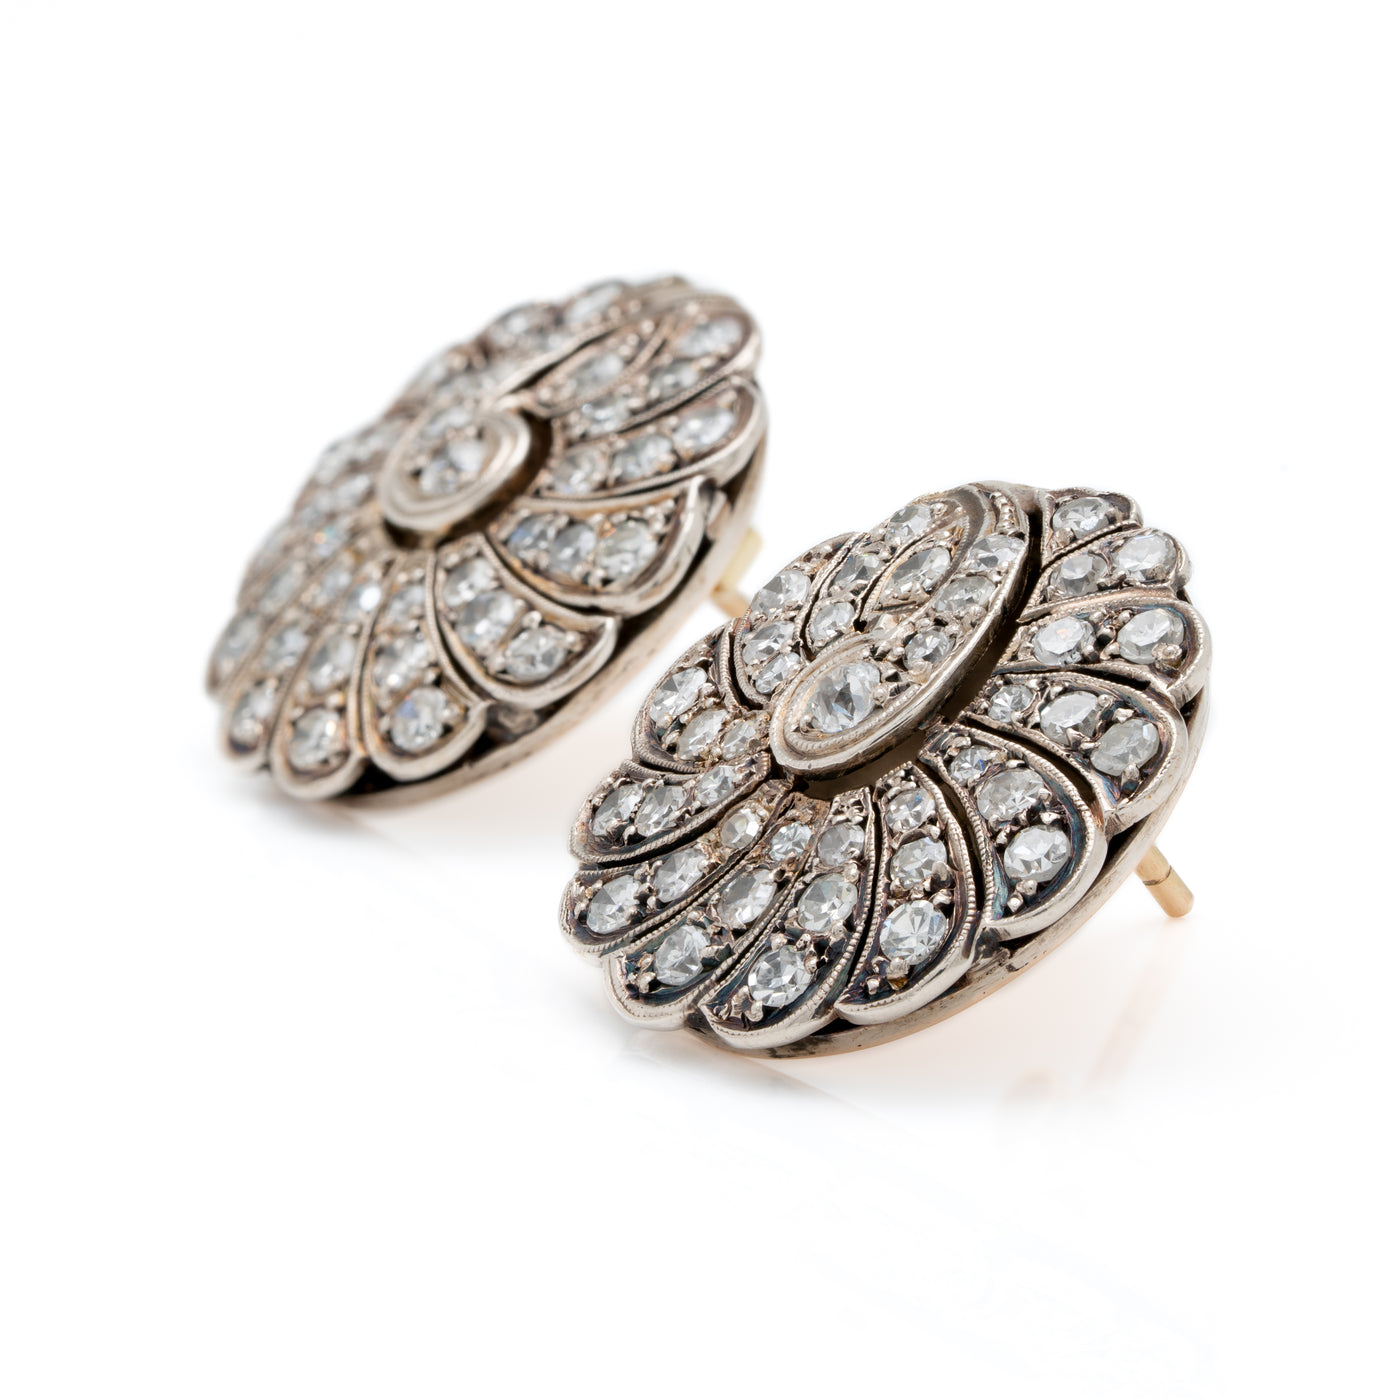 LATE VICTORIAN SILVER AND 14K YELLOW GOLD 2.5CTS OLD EUROPEAN CUT DIAMOND PAISLEY CLUSTER EARRINGS c.1900